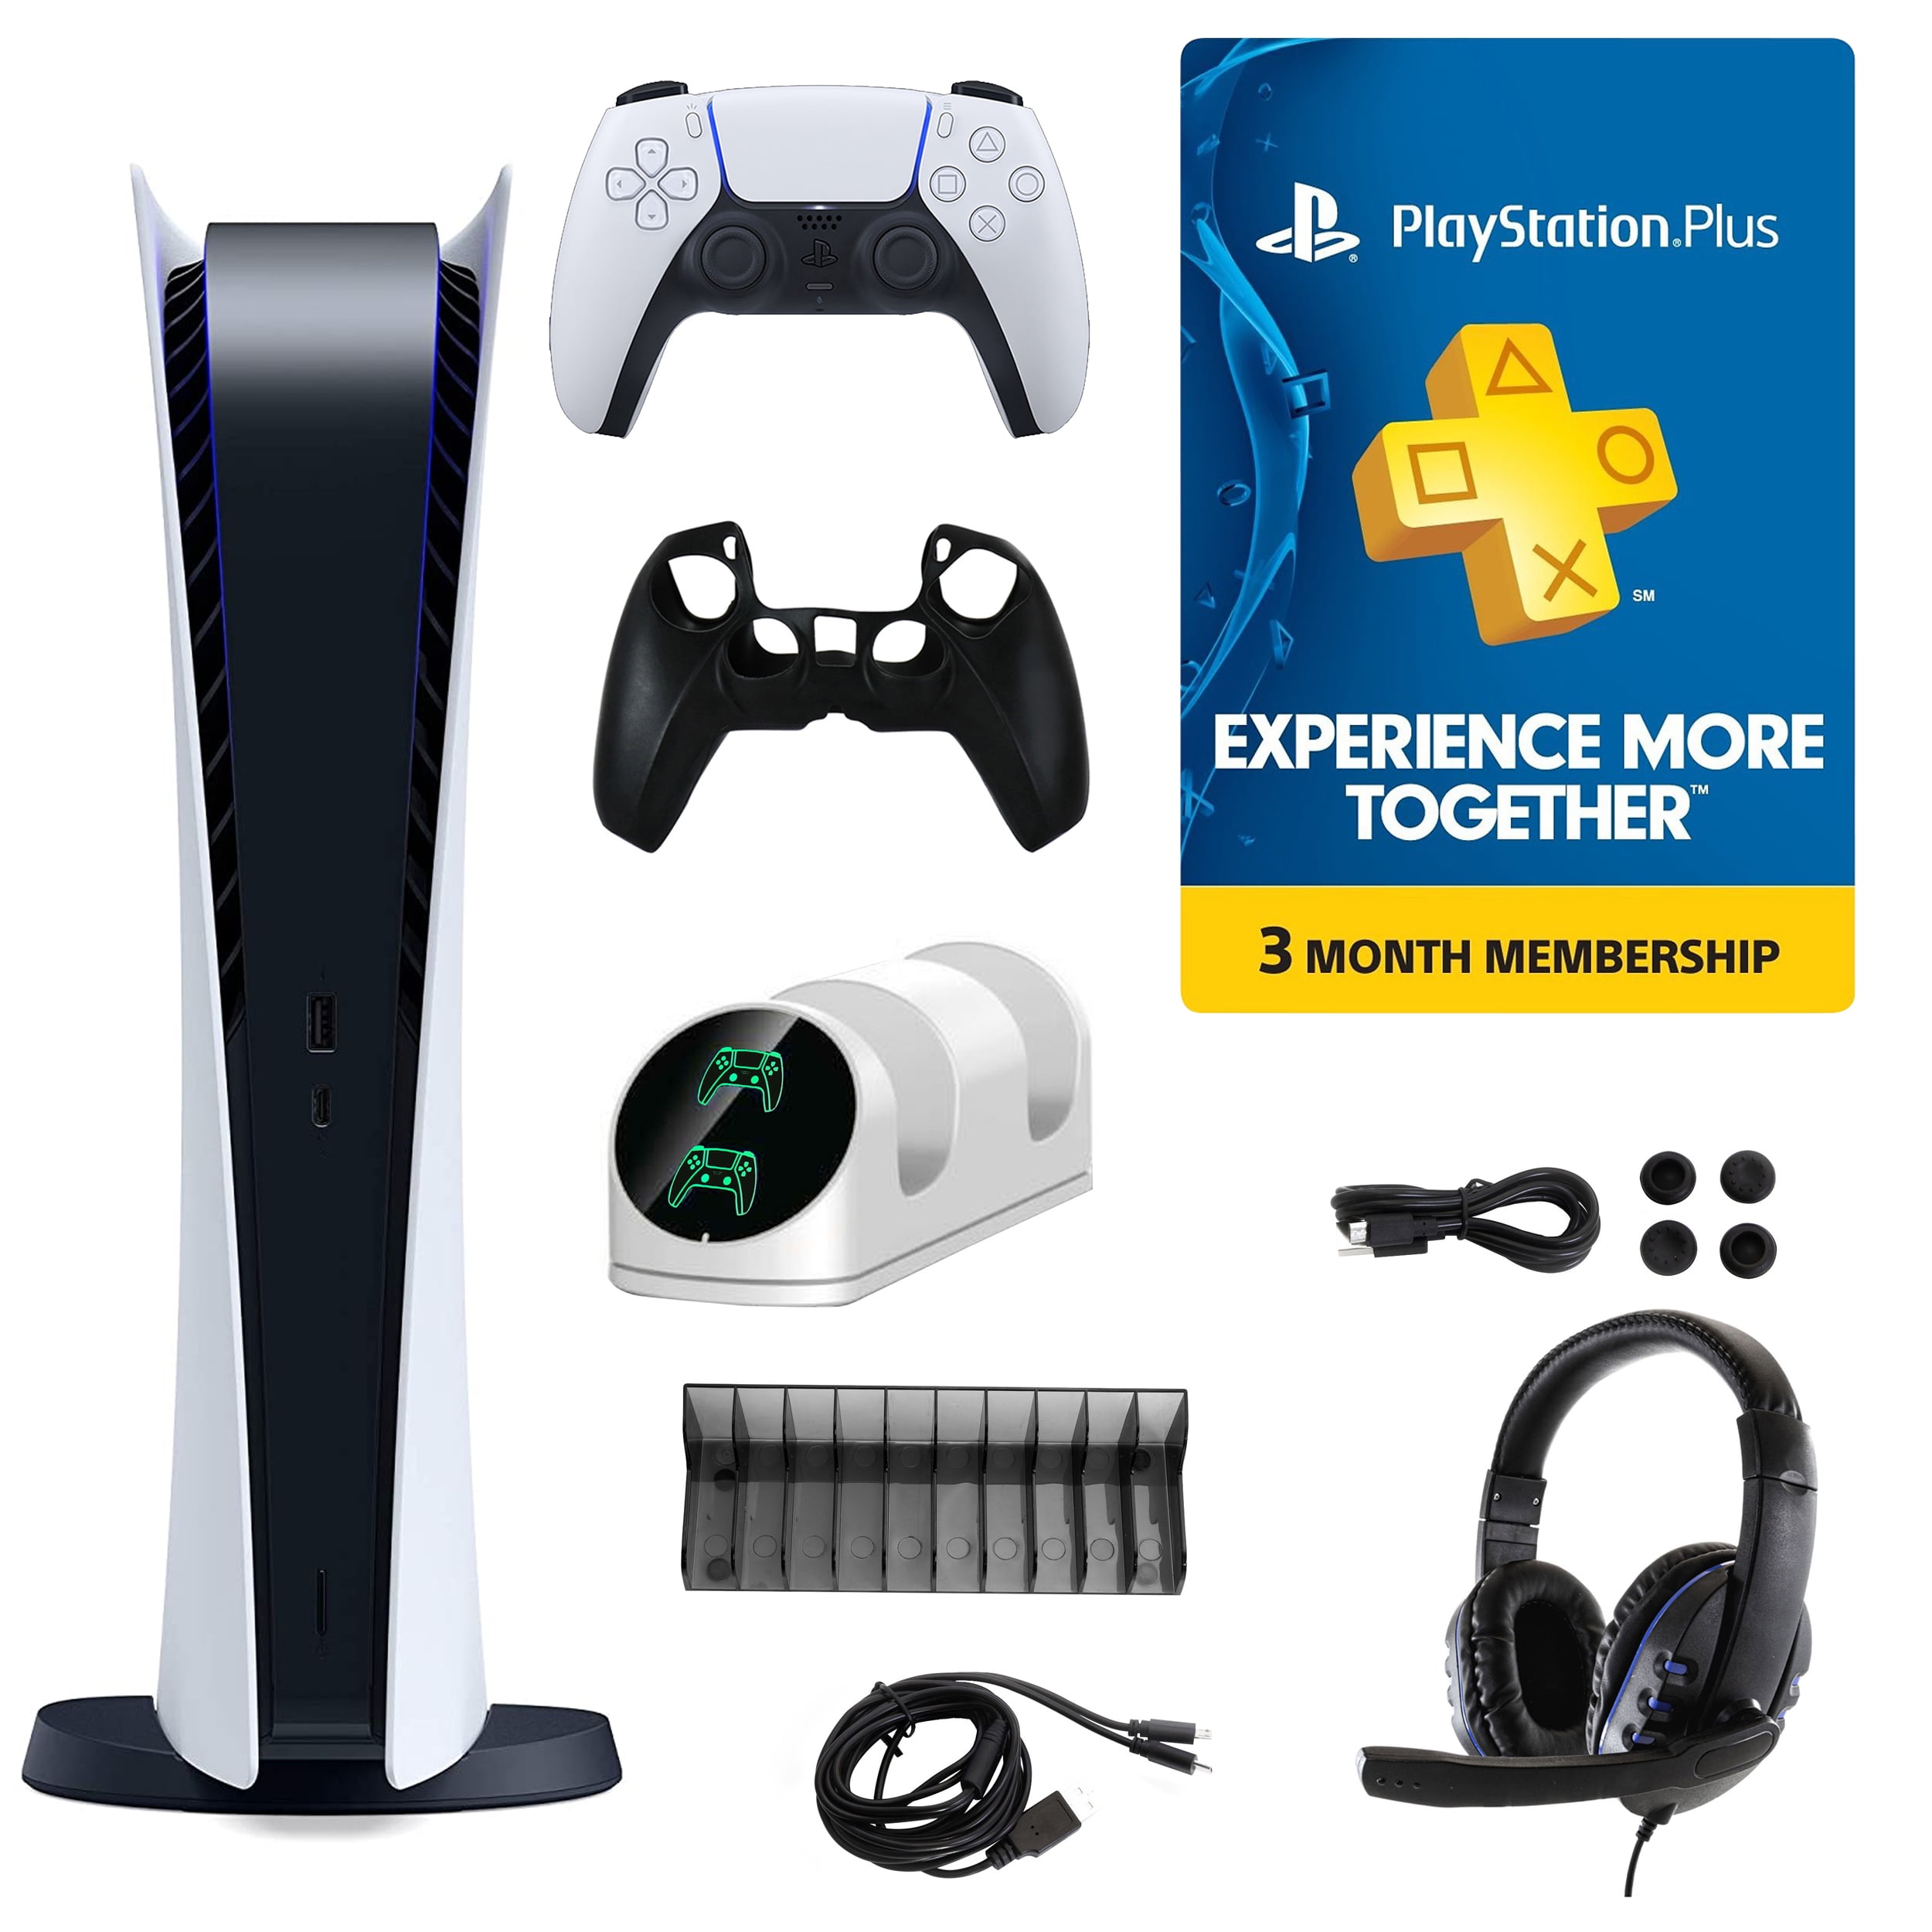 PlayStation 5 Digital Console with Accessories Kit and 3 Month PSN Card